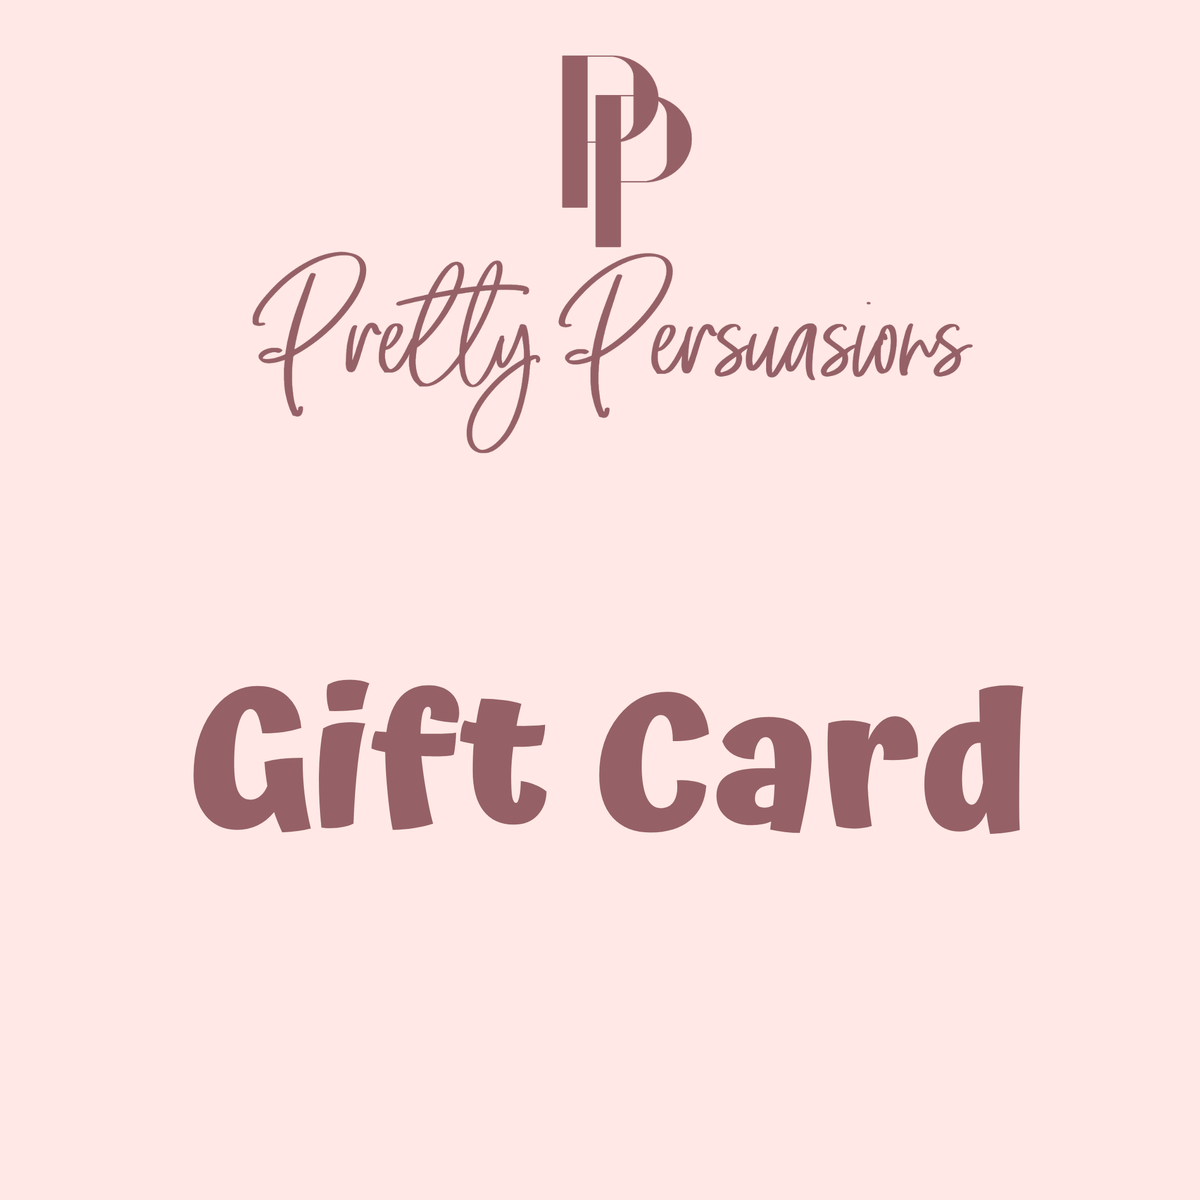 PP Gift Card - Pretty Persuasions 